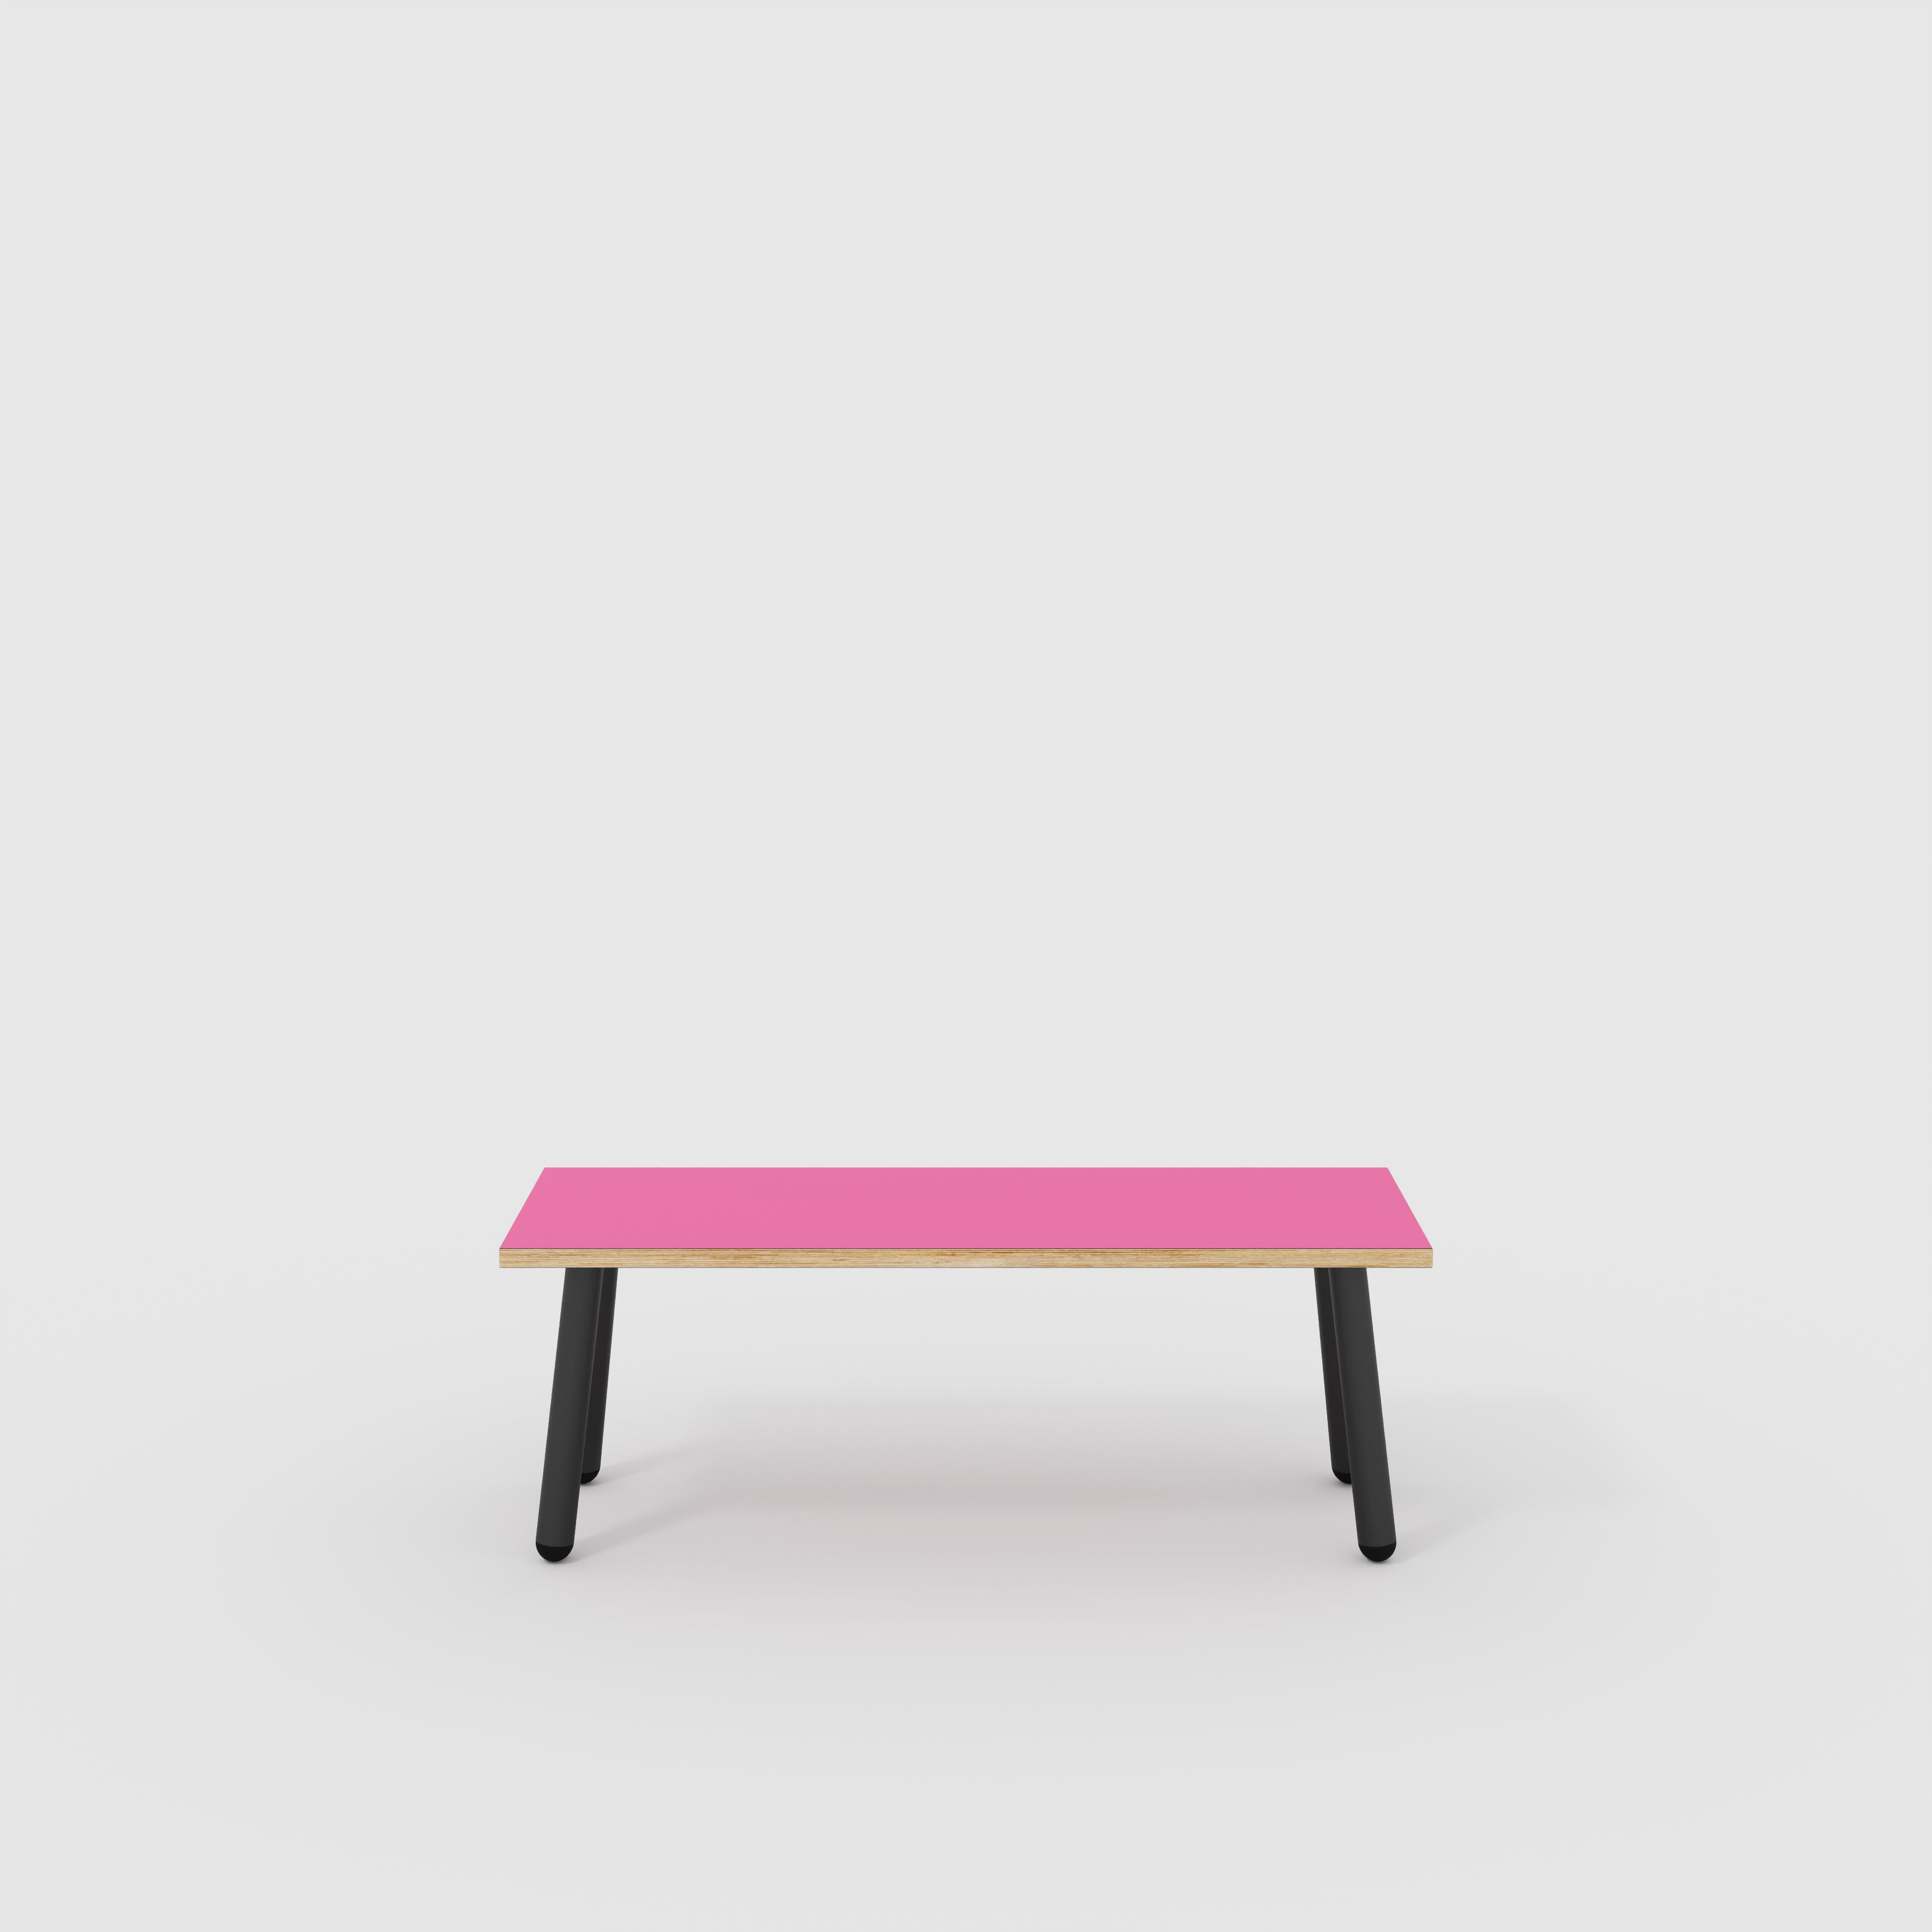 Bench Seat with Black Round Single Pin Legs - Formica Juicy Pink - 1200(w) x 400(d)